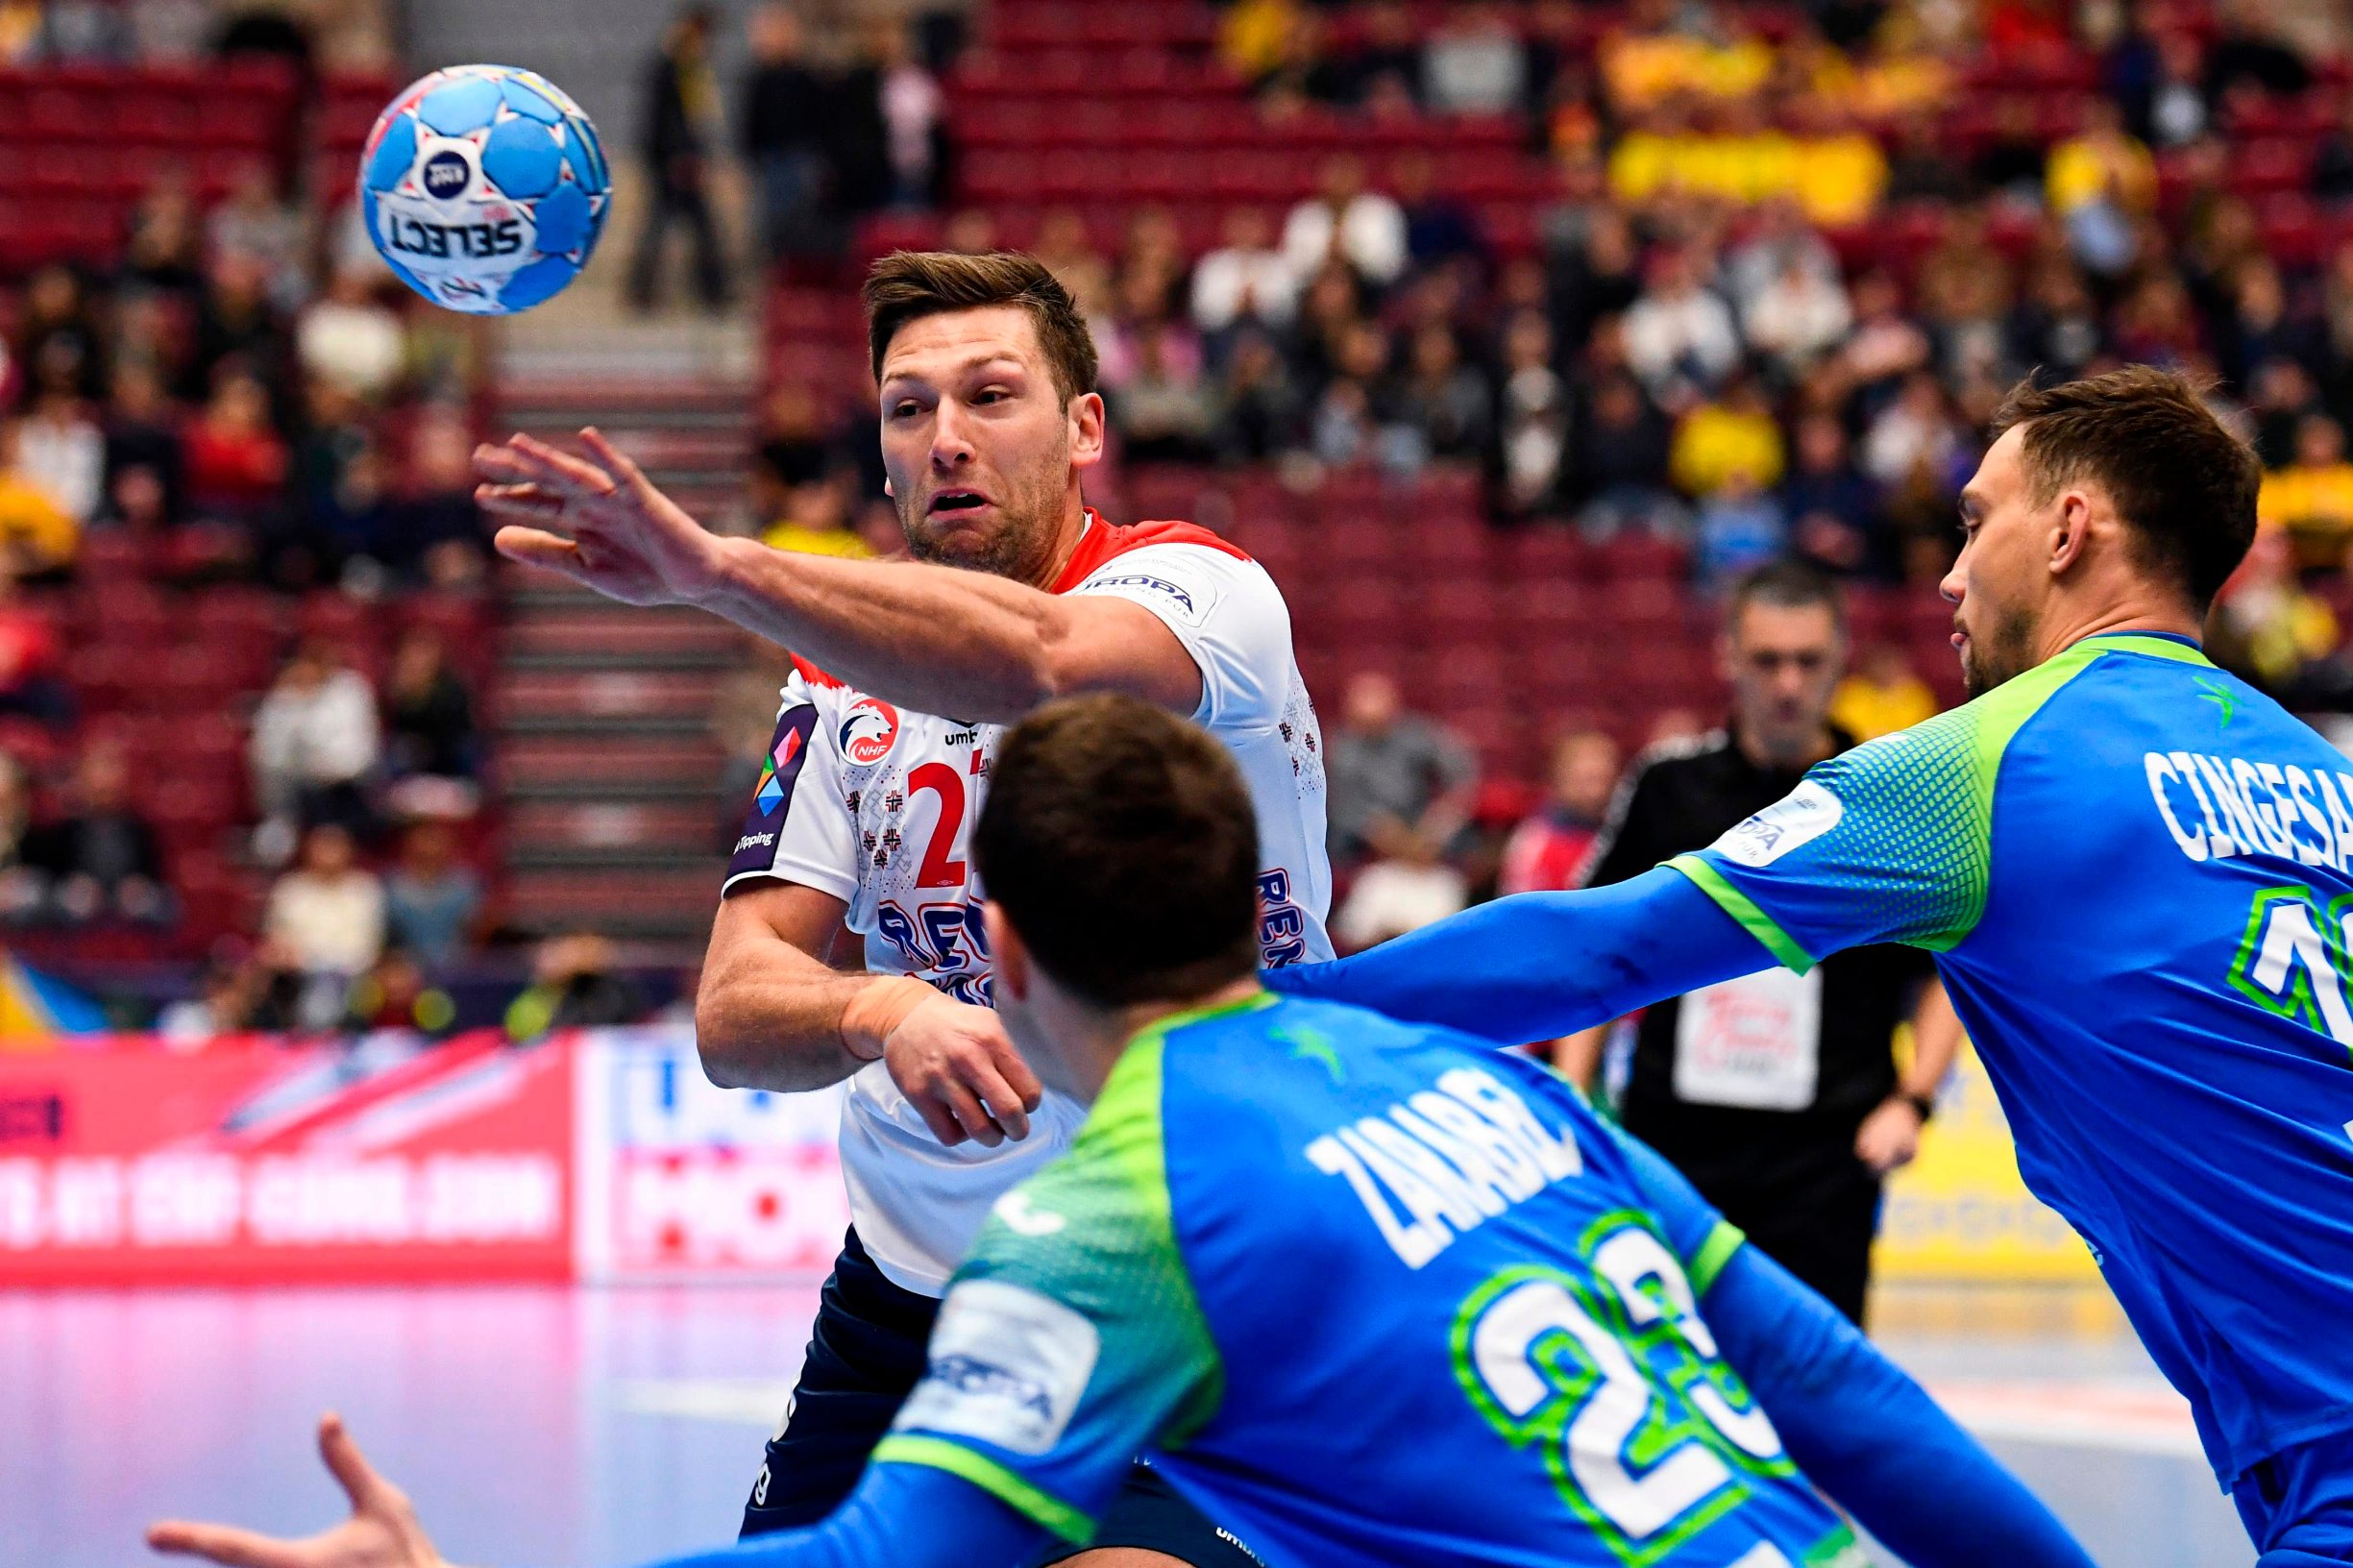 Norway's Harald Reinkind (L) passes the ball during the Men's European Handball Championship main round day 5 Group II match Norway v Slovenia in Malmo, Sweden on January 22, 2020. (Photo by Jonathan NACKSTRAND / AFP)